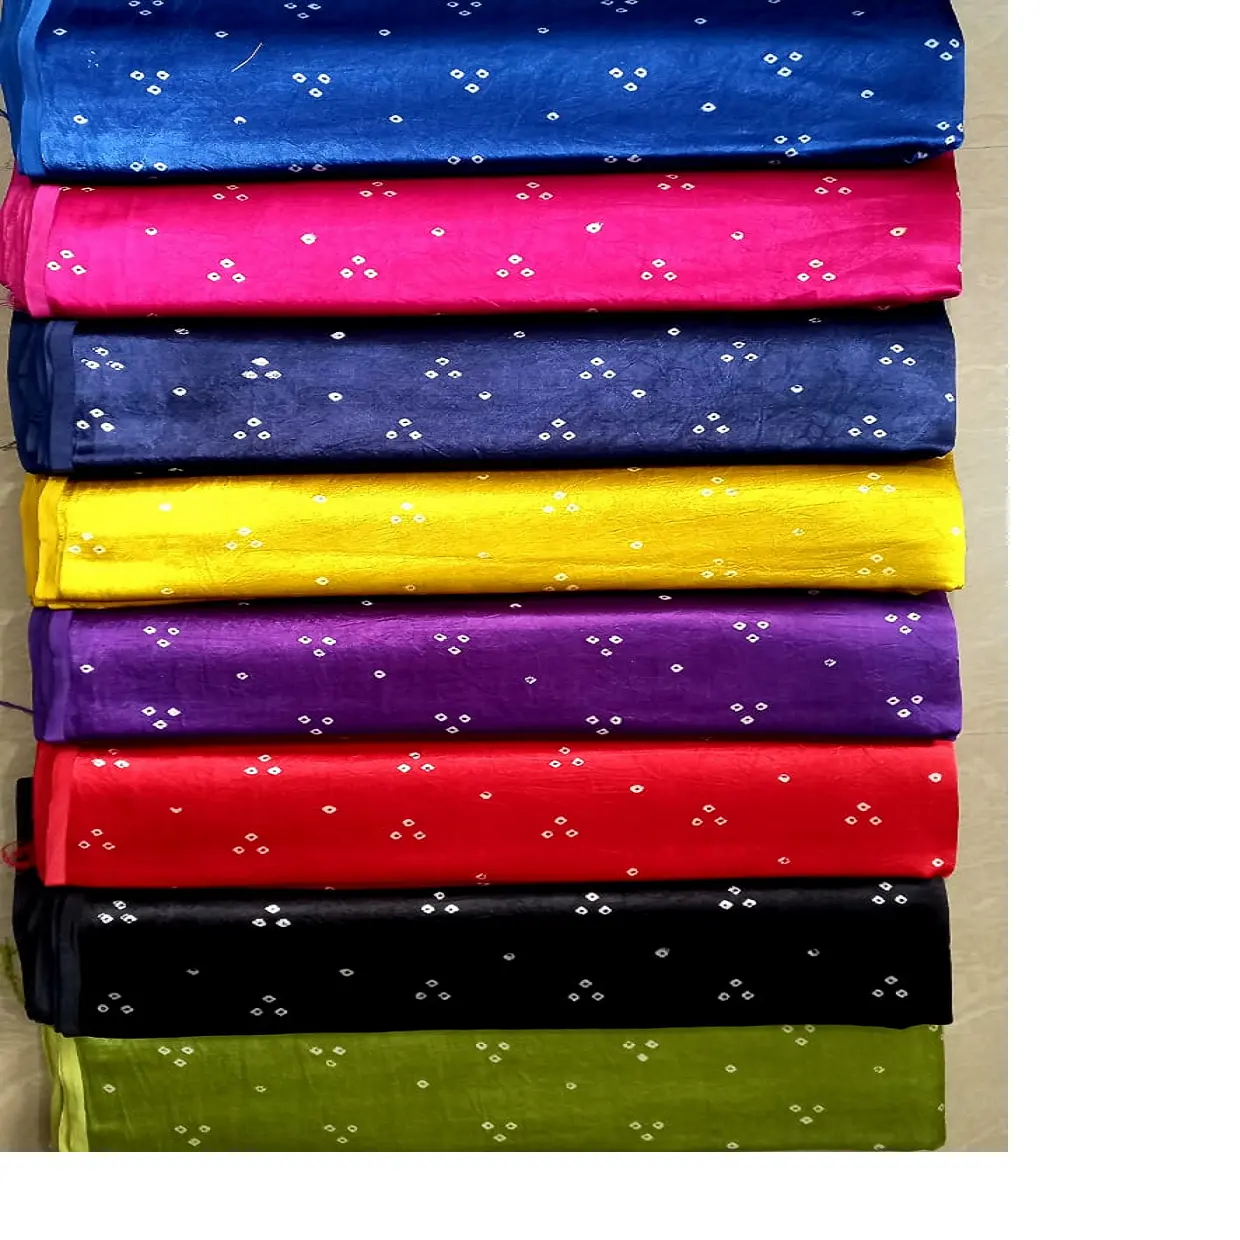 custom made plain colored Mashru hand Woven Fabrics ideal for Dress Designers and Fabric Supply Stores for resale in polka dots